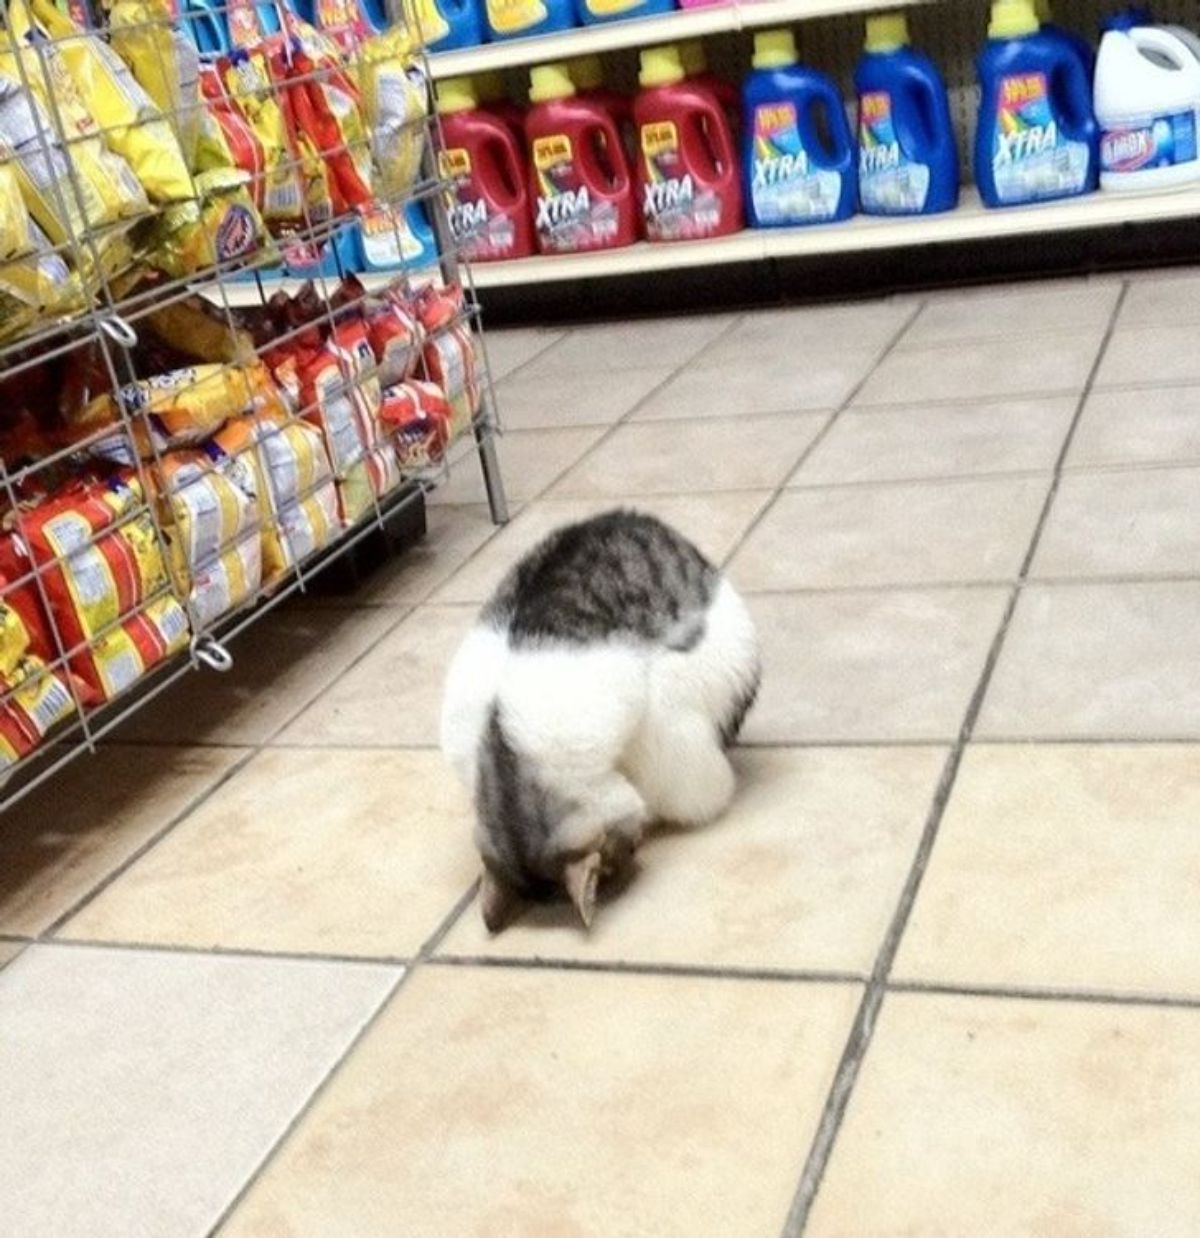 white grey and black cat doing a face plant on a tiled floor at a grocery store